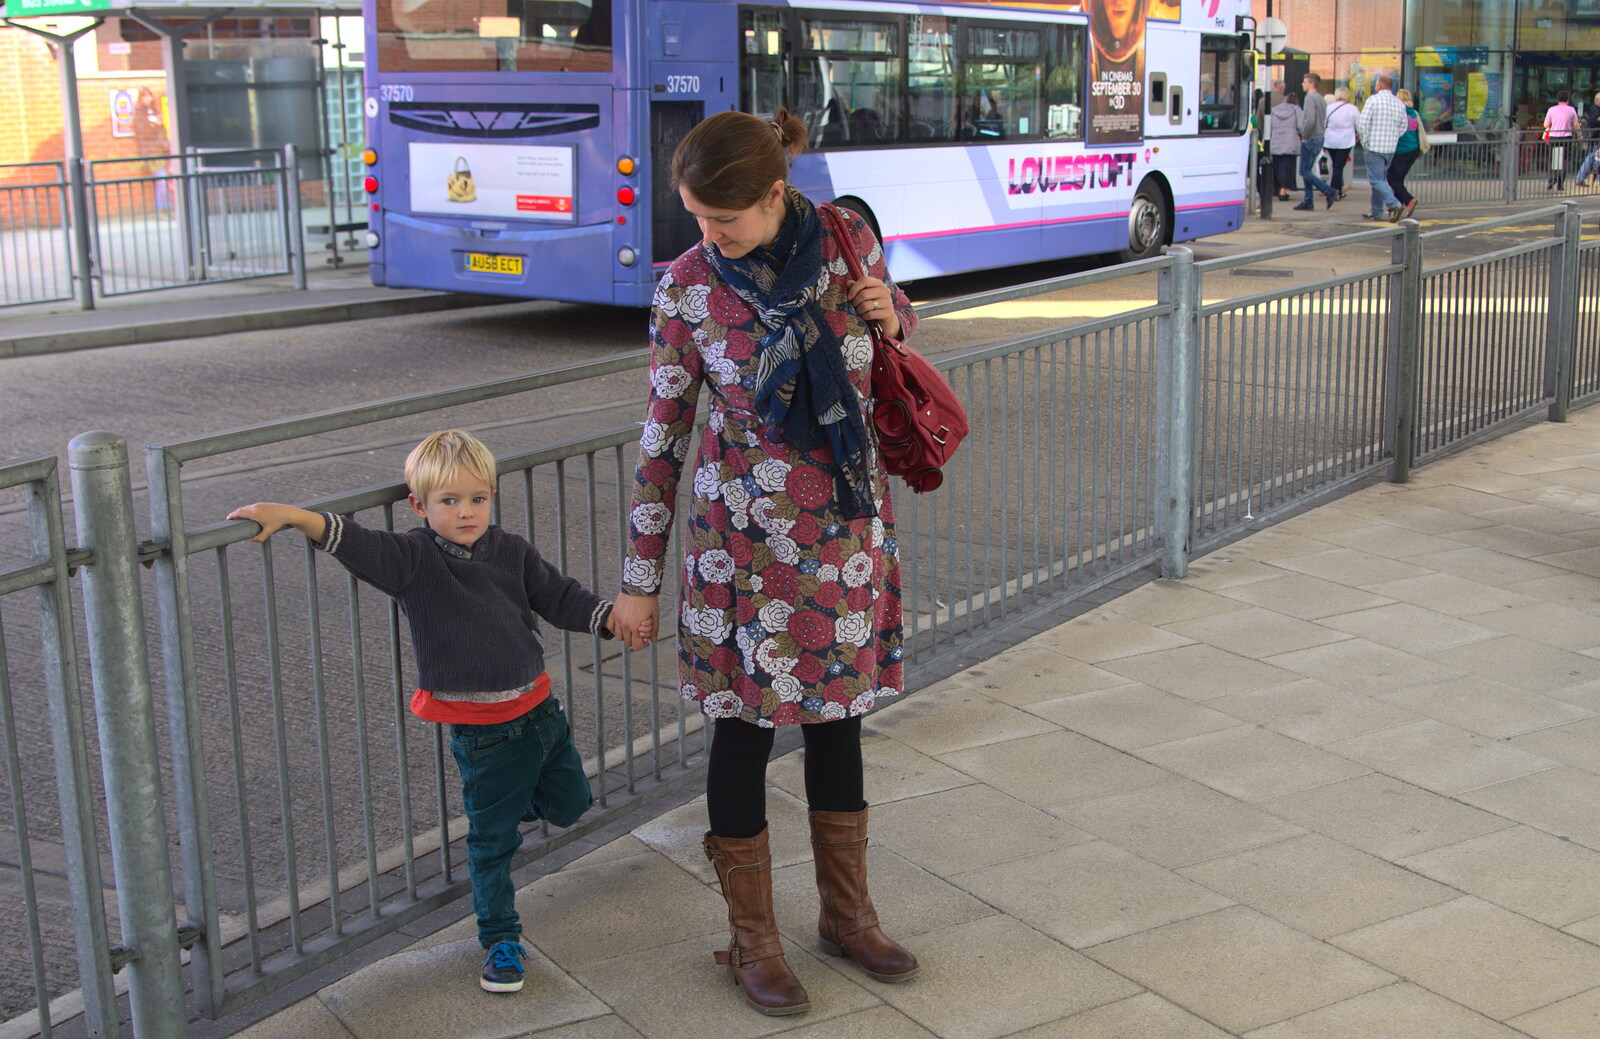 Harry and Isobel at Norwich bus station from Fred's Lego, a Giant Clock, and a Trip to Norwich, Norfolk - 25th September 2015